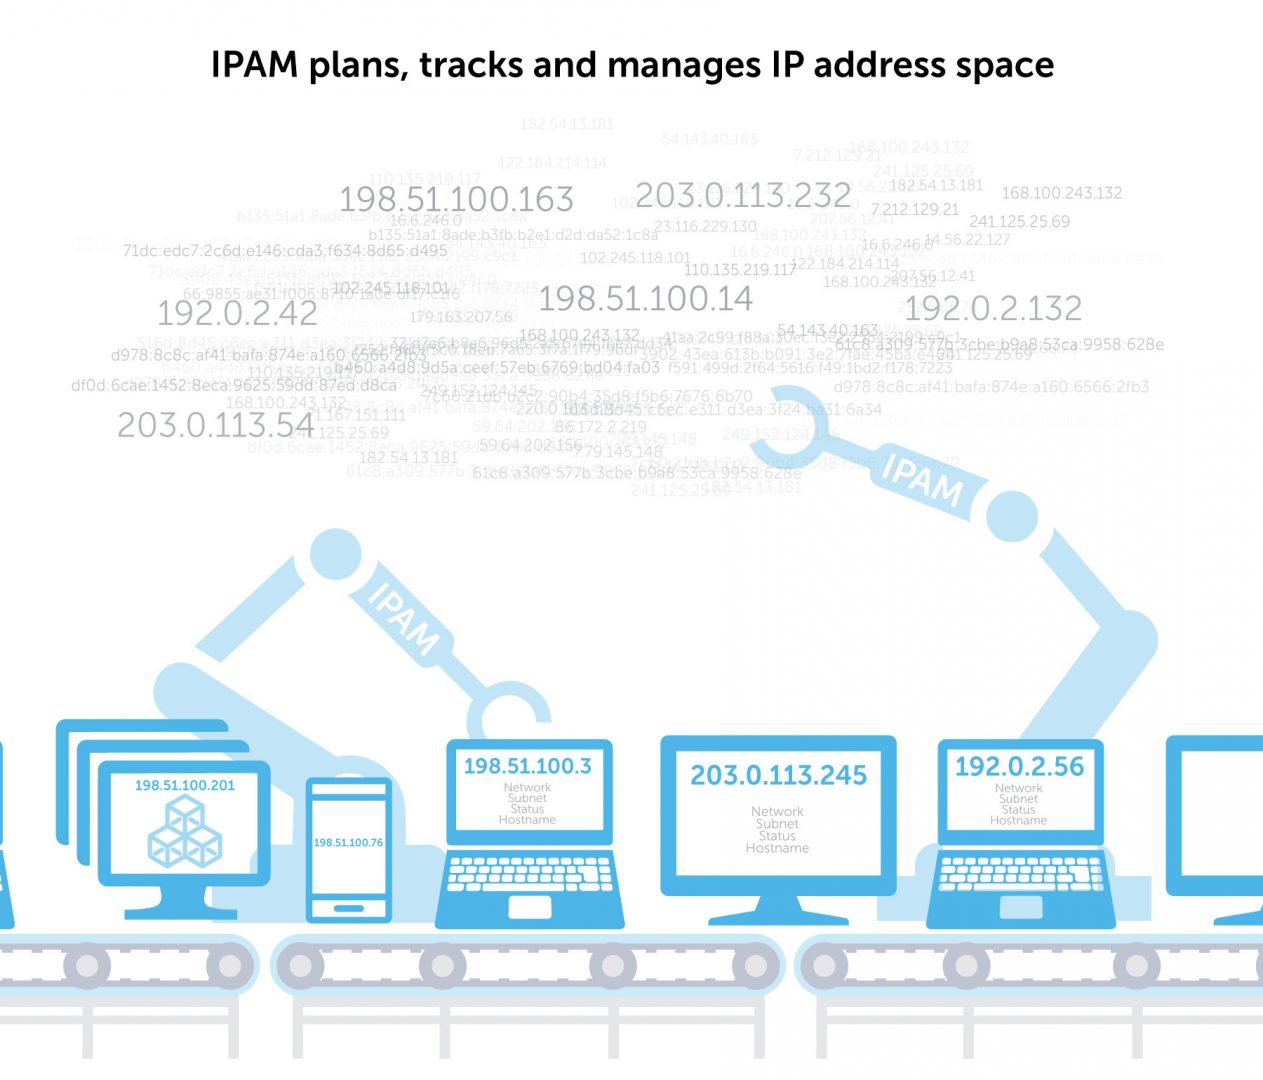 IPAM plans, tracks, and manages IP address space